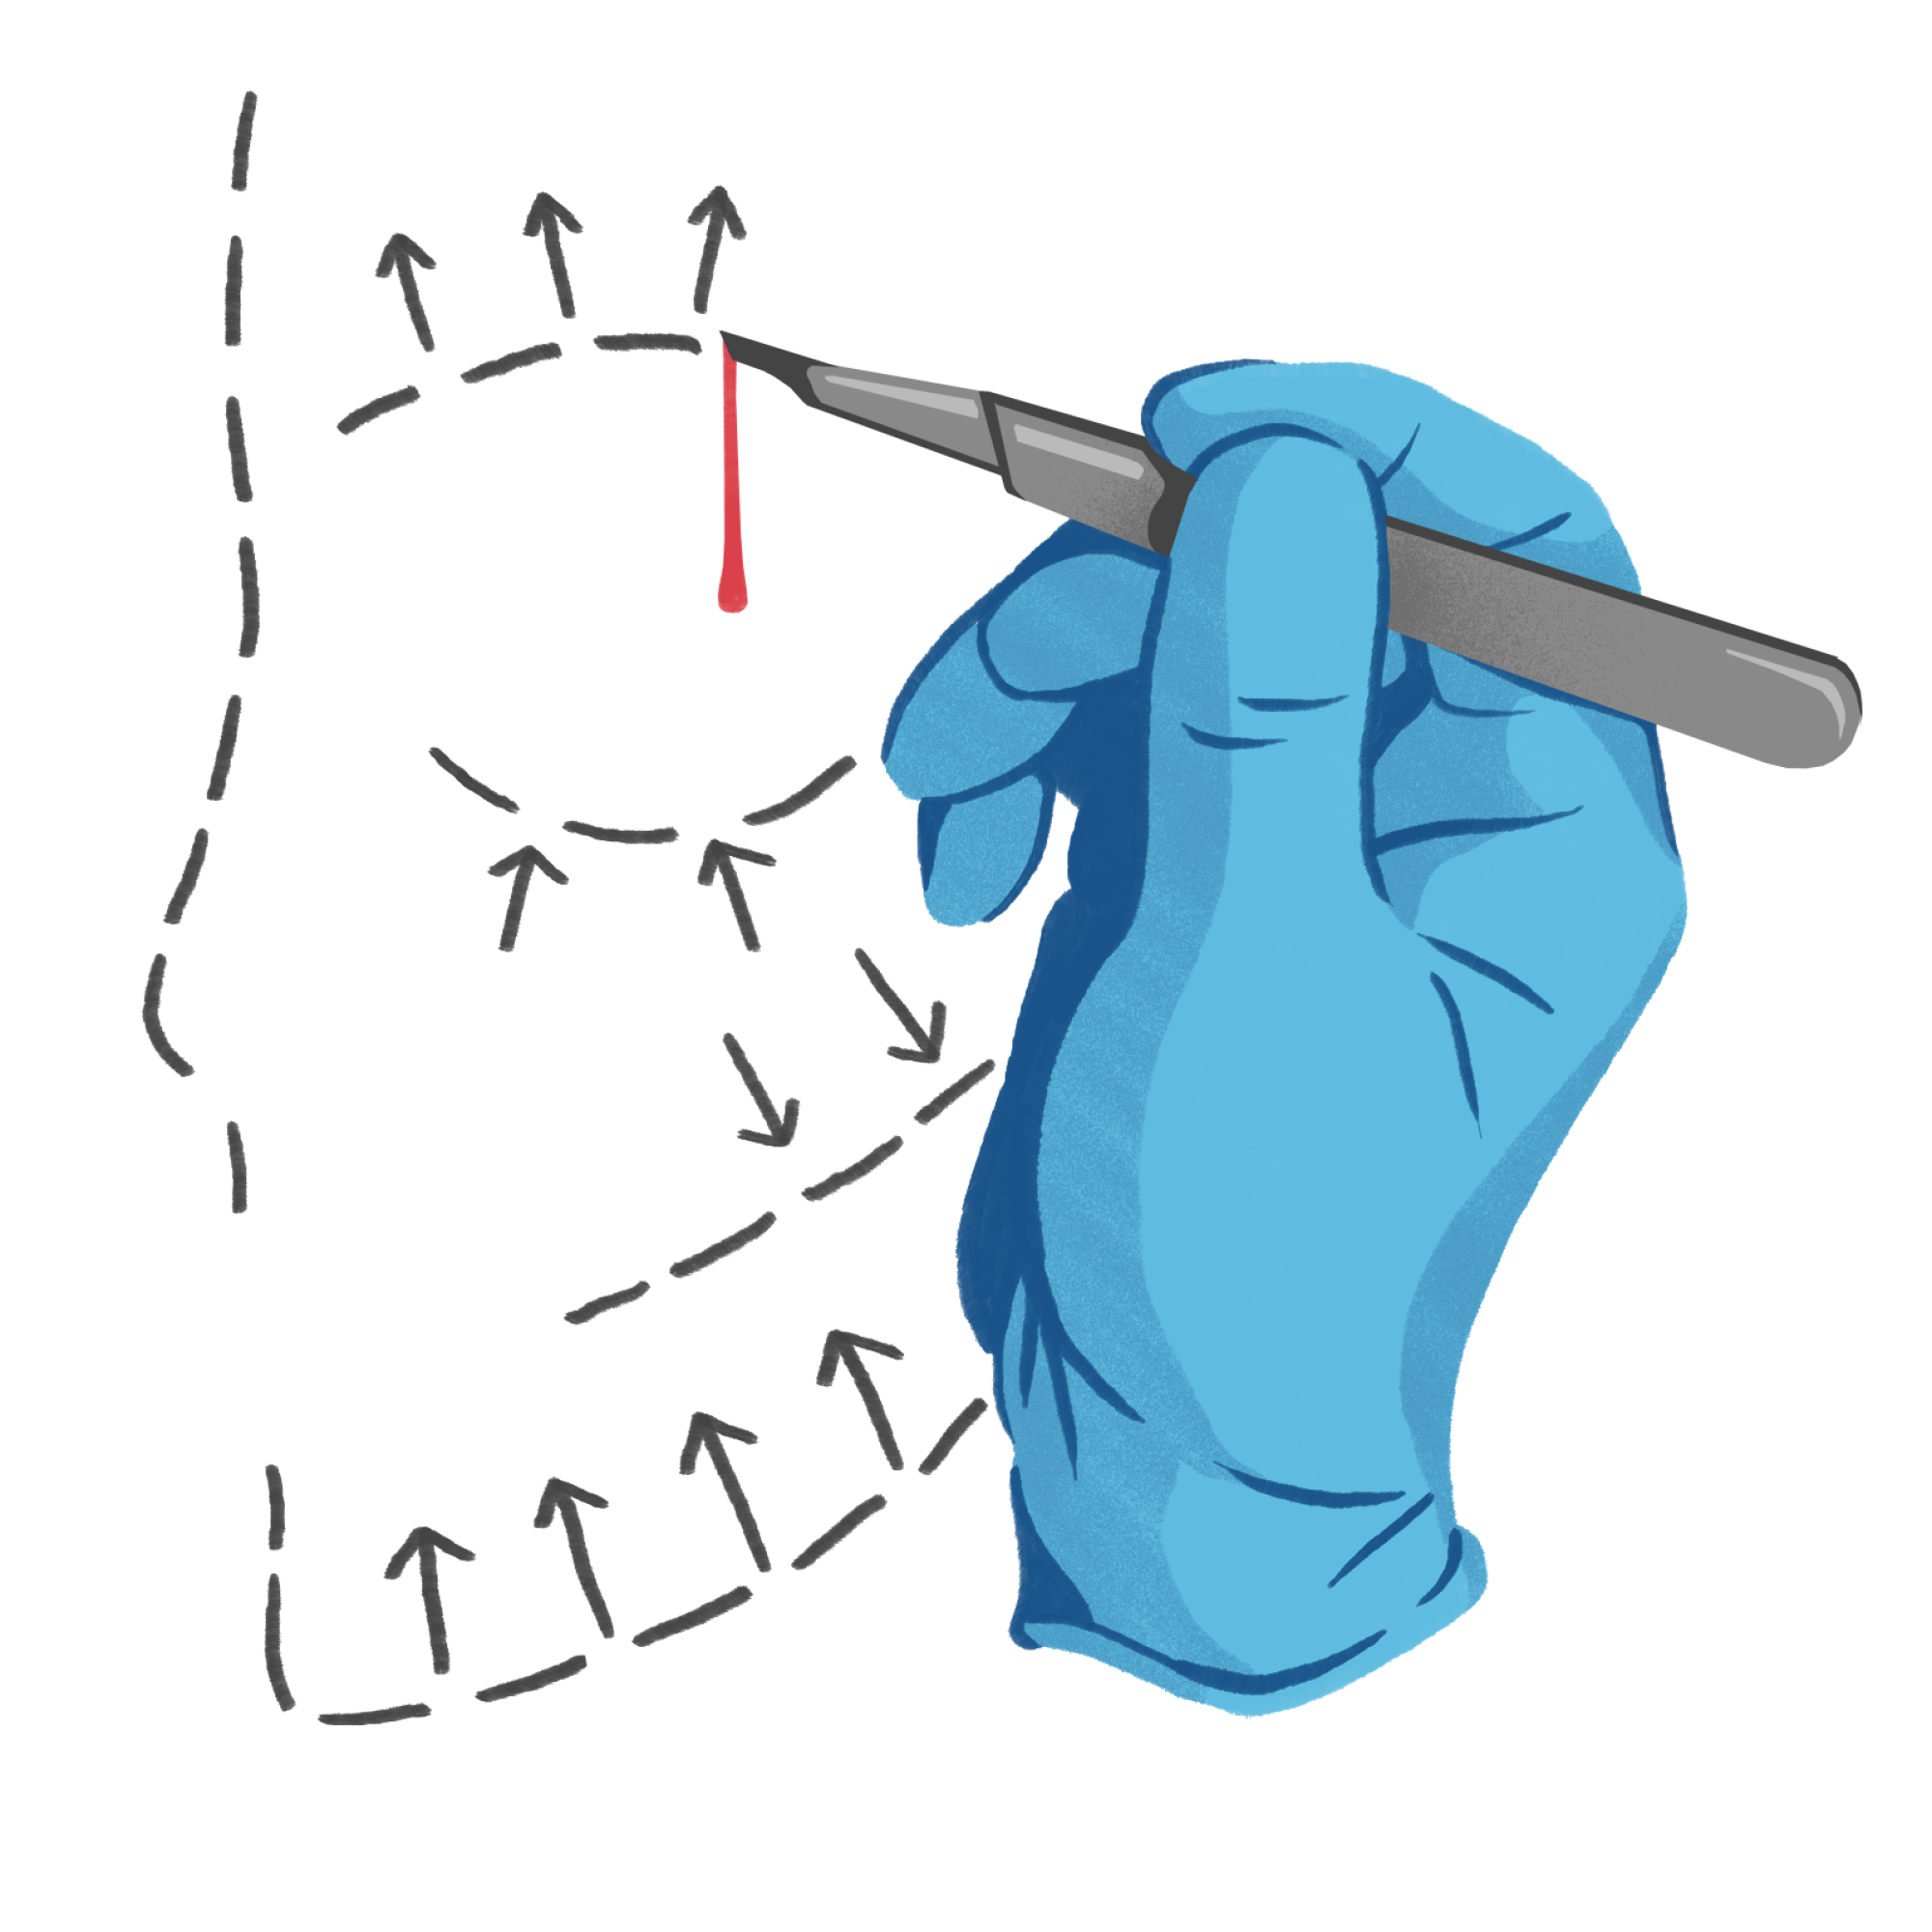 Conceptual illustration shows surgeon's scalpel and dashed lines